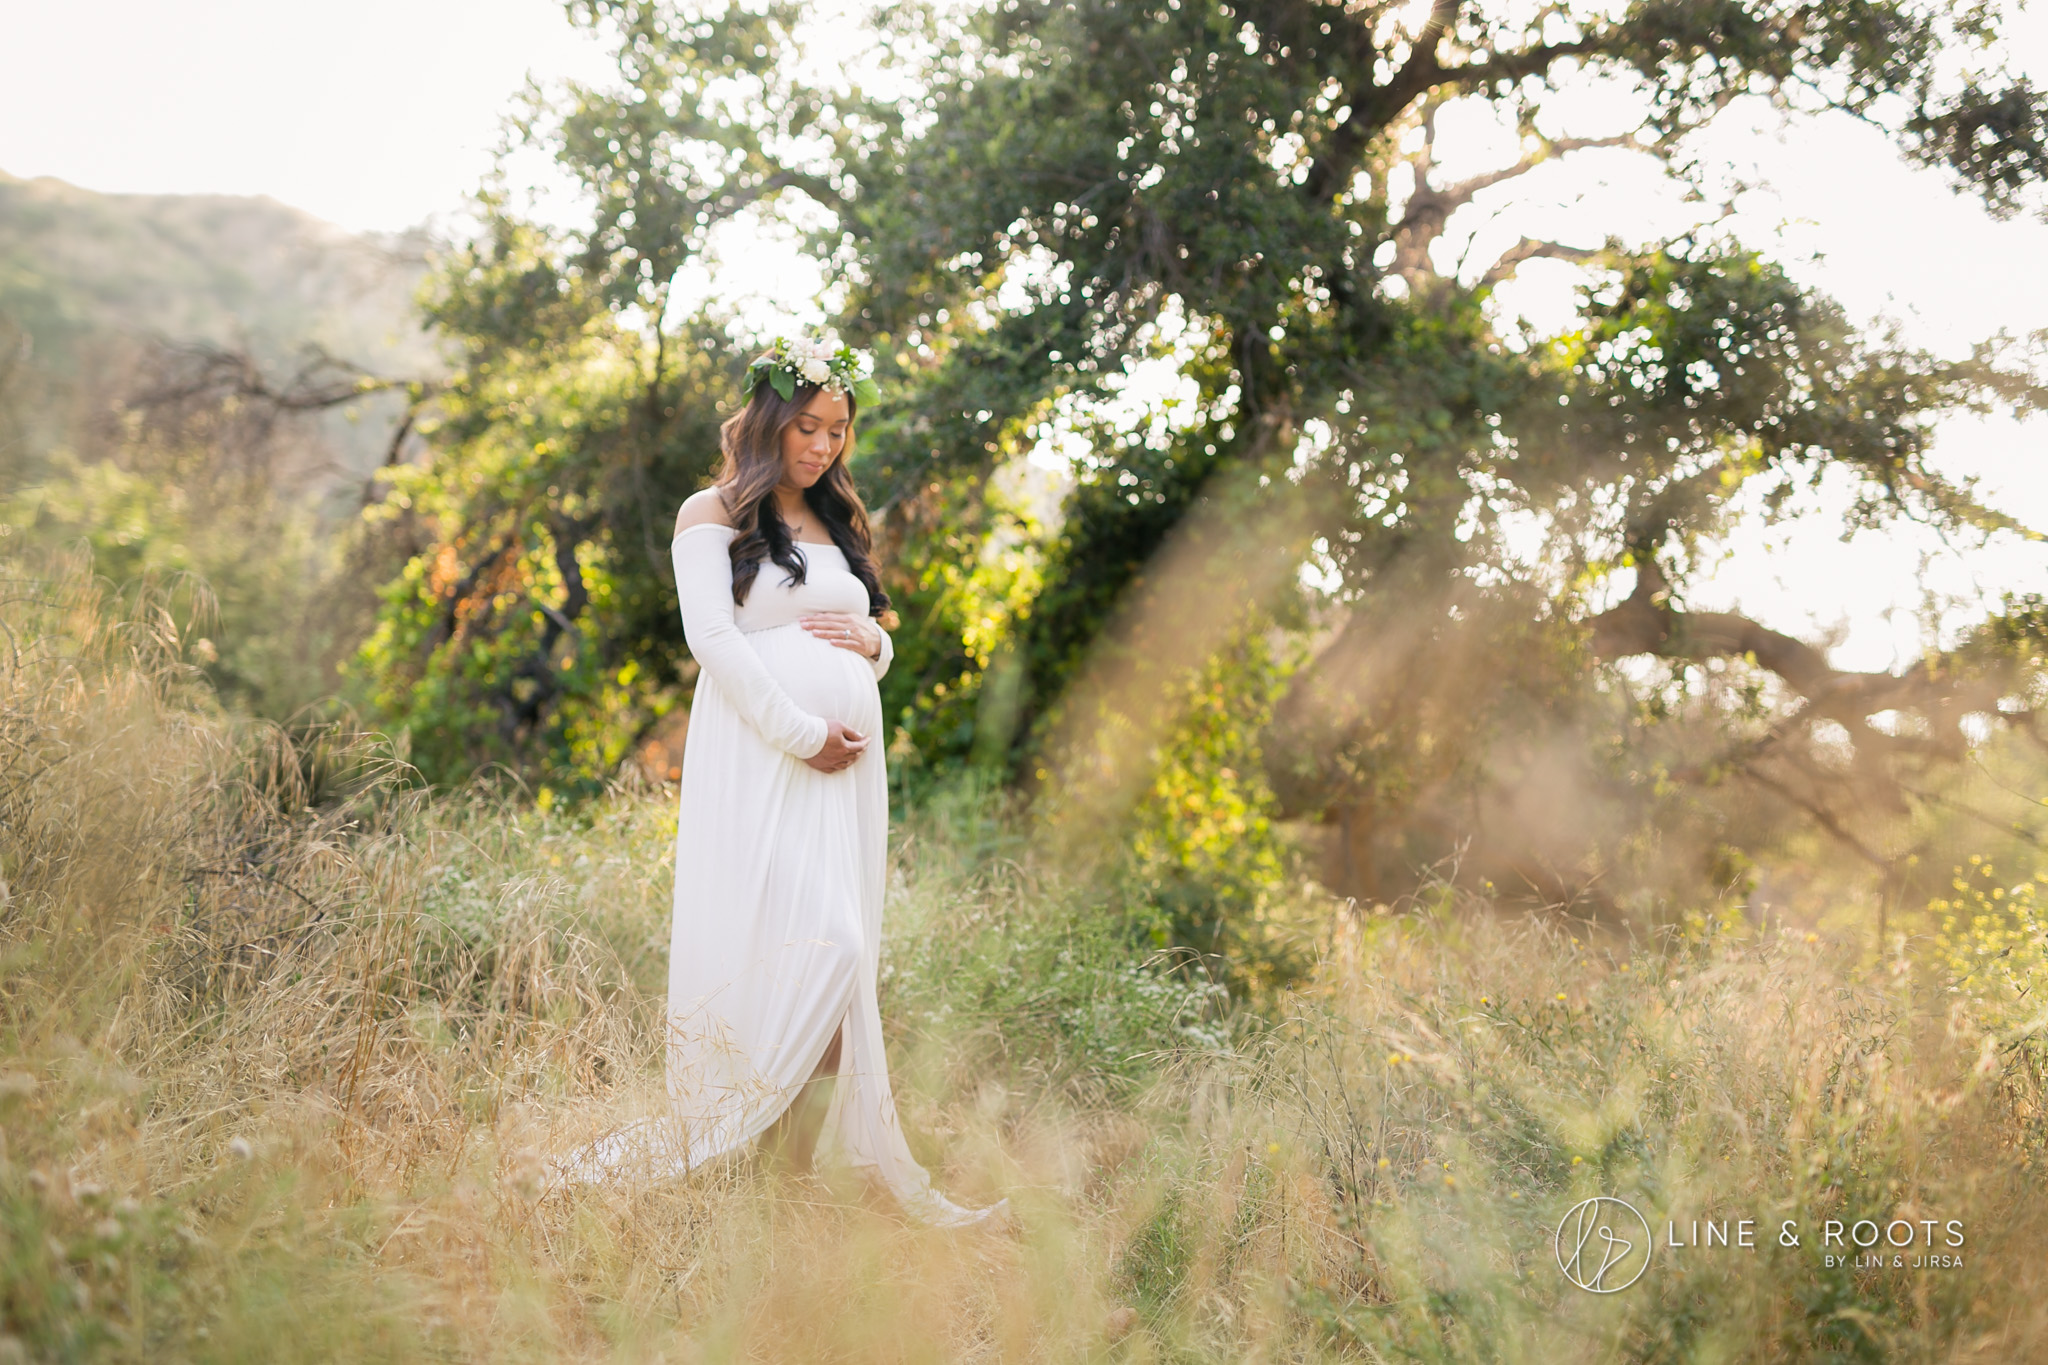 Maternity sessions are a celebration of life and nature so adding other sym...